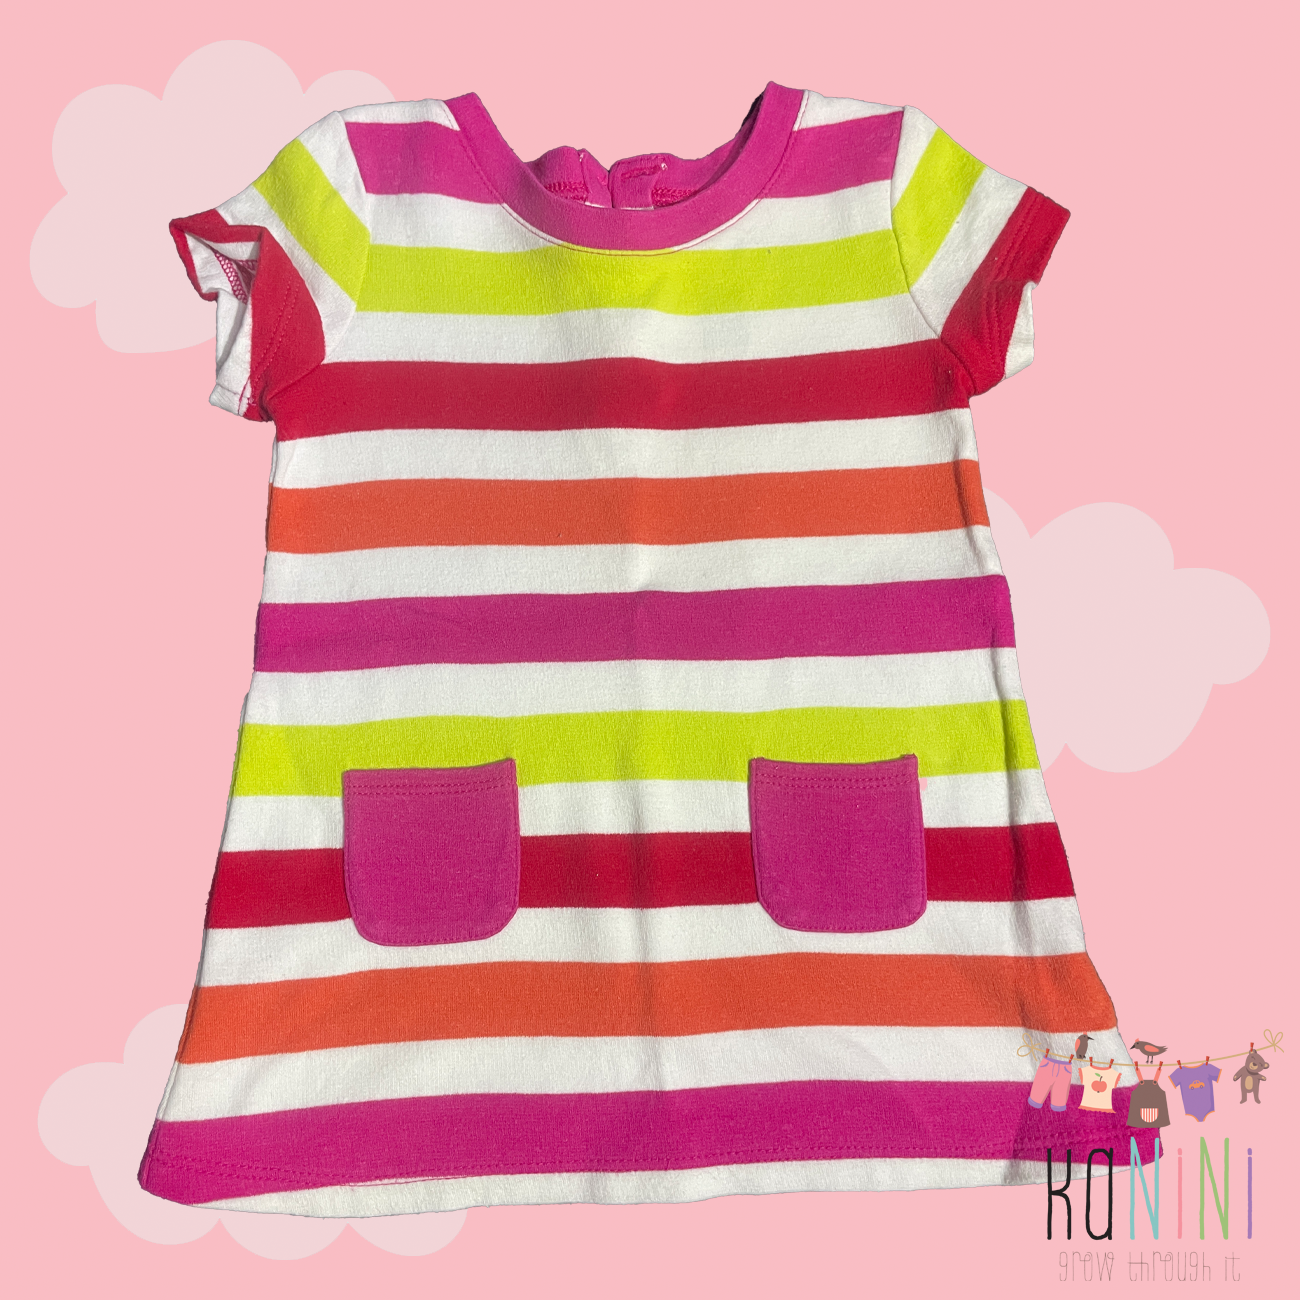 Featured image for “Baby GAP 6 - 12 Months Girls Candy Stripe Dress”